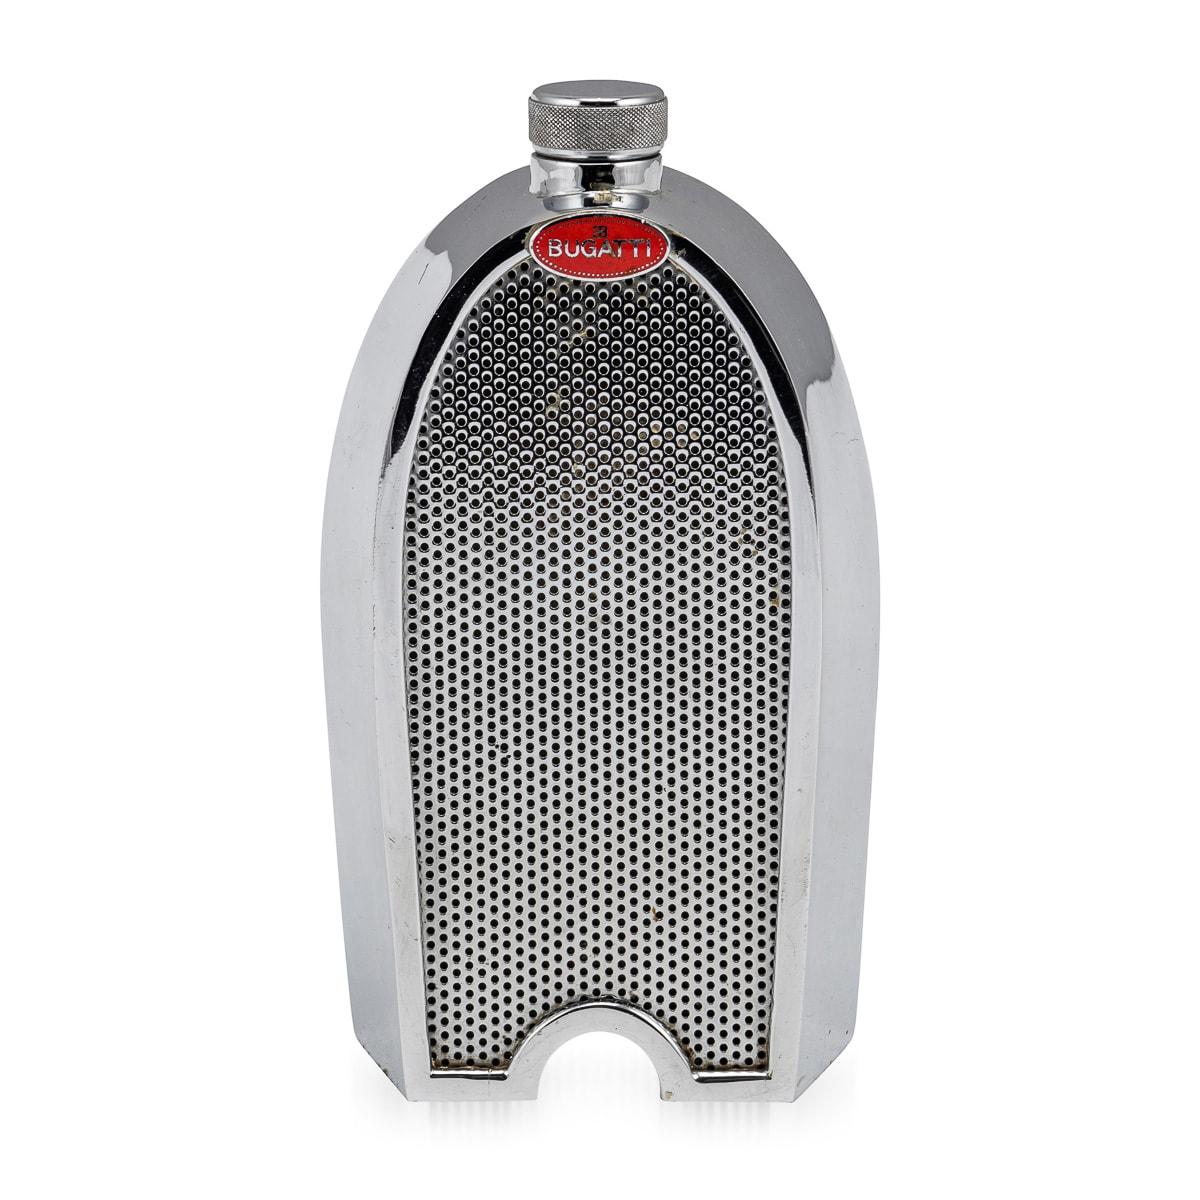 A vintage Bugatti chrome radiator grille decanter made in England in the 1970s, bearing the red enamel radiator badge. The decanter is equipped with a “slot” in the casing at the rear allowing visibility of the contents with baize cloth to the base.